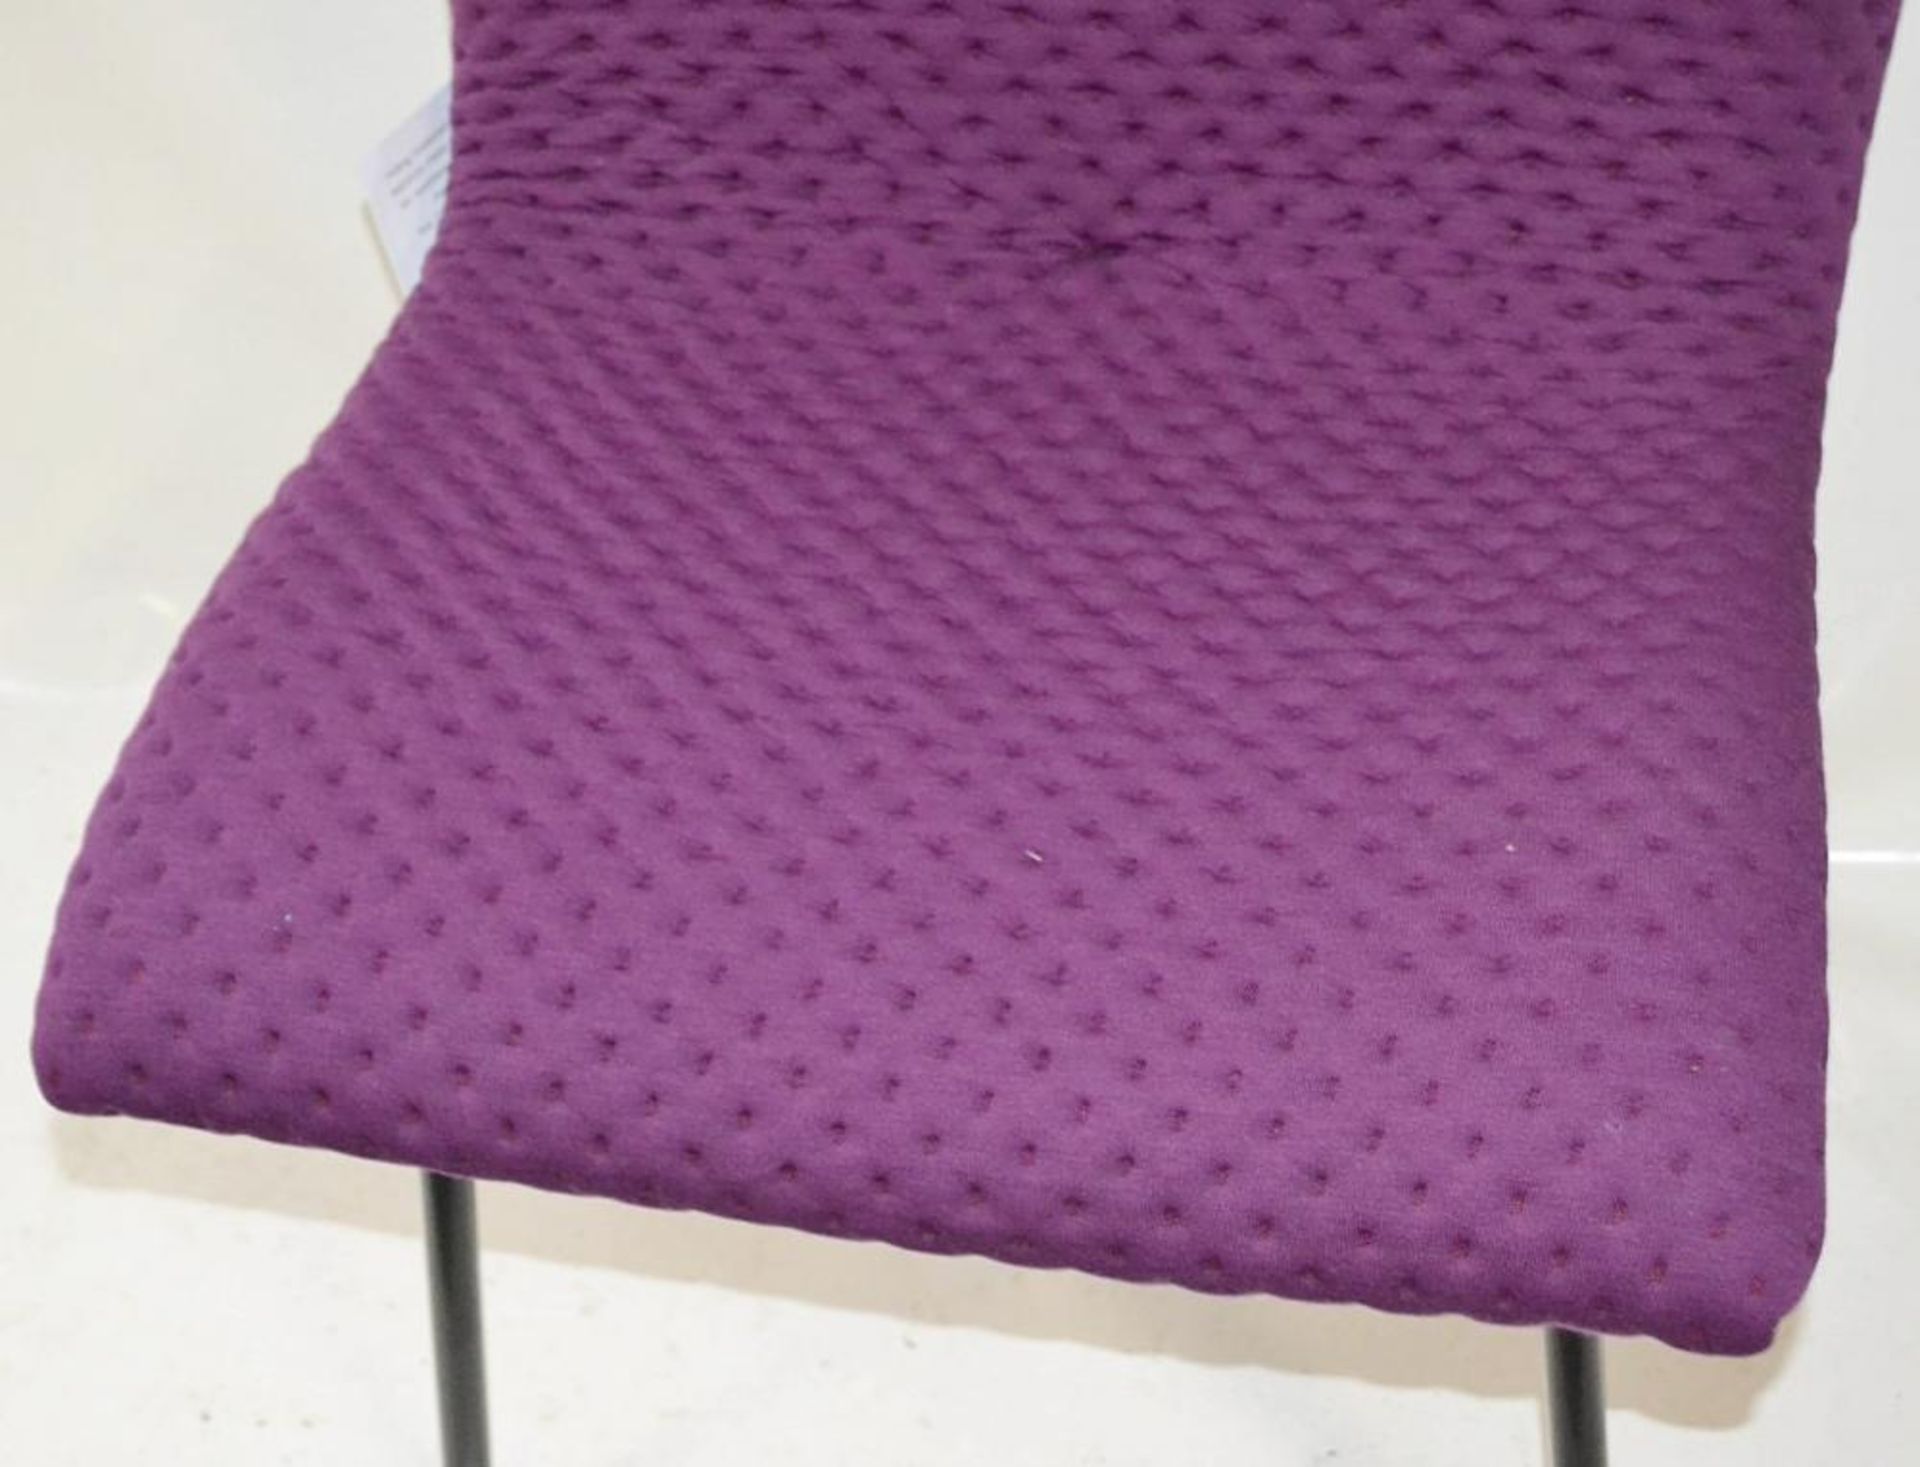 1 x Ligne Roset 'Calin' Chair - Features Bright Purple Upholsterey - Made In France - Ref: 6206608 P - Image 5 of 7